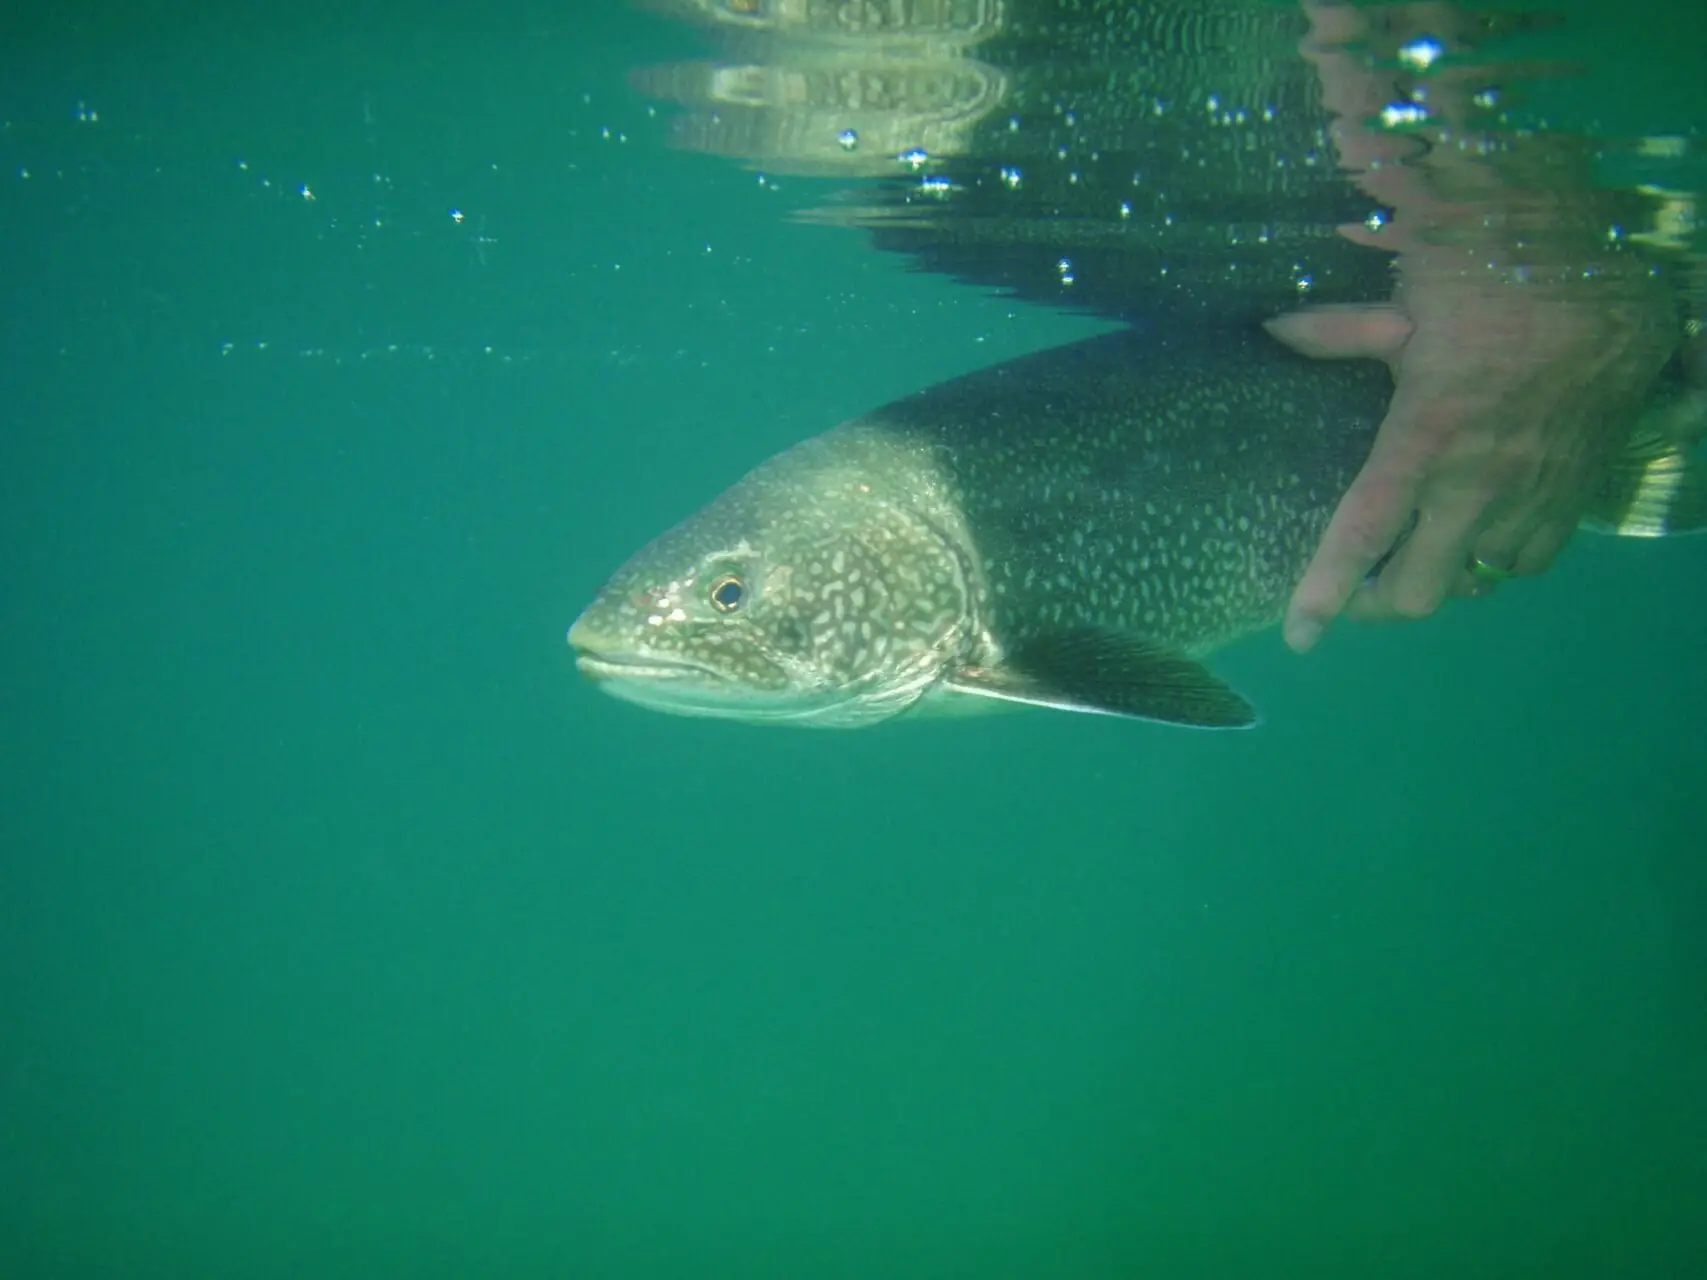 Lake Trout being released: this is a popular species of trout in North America